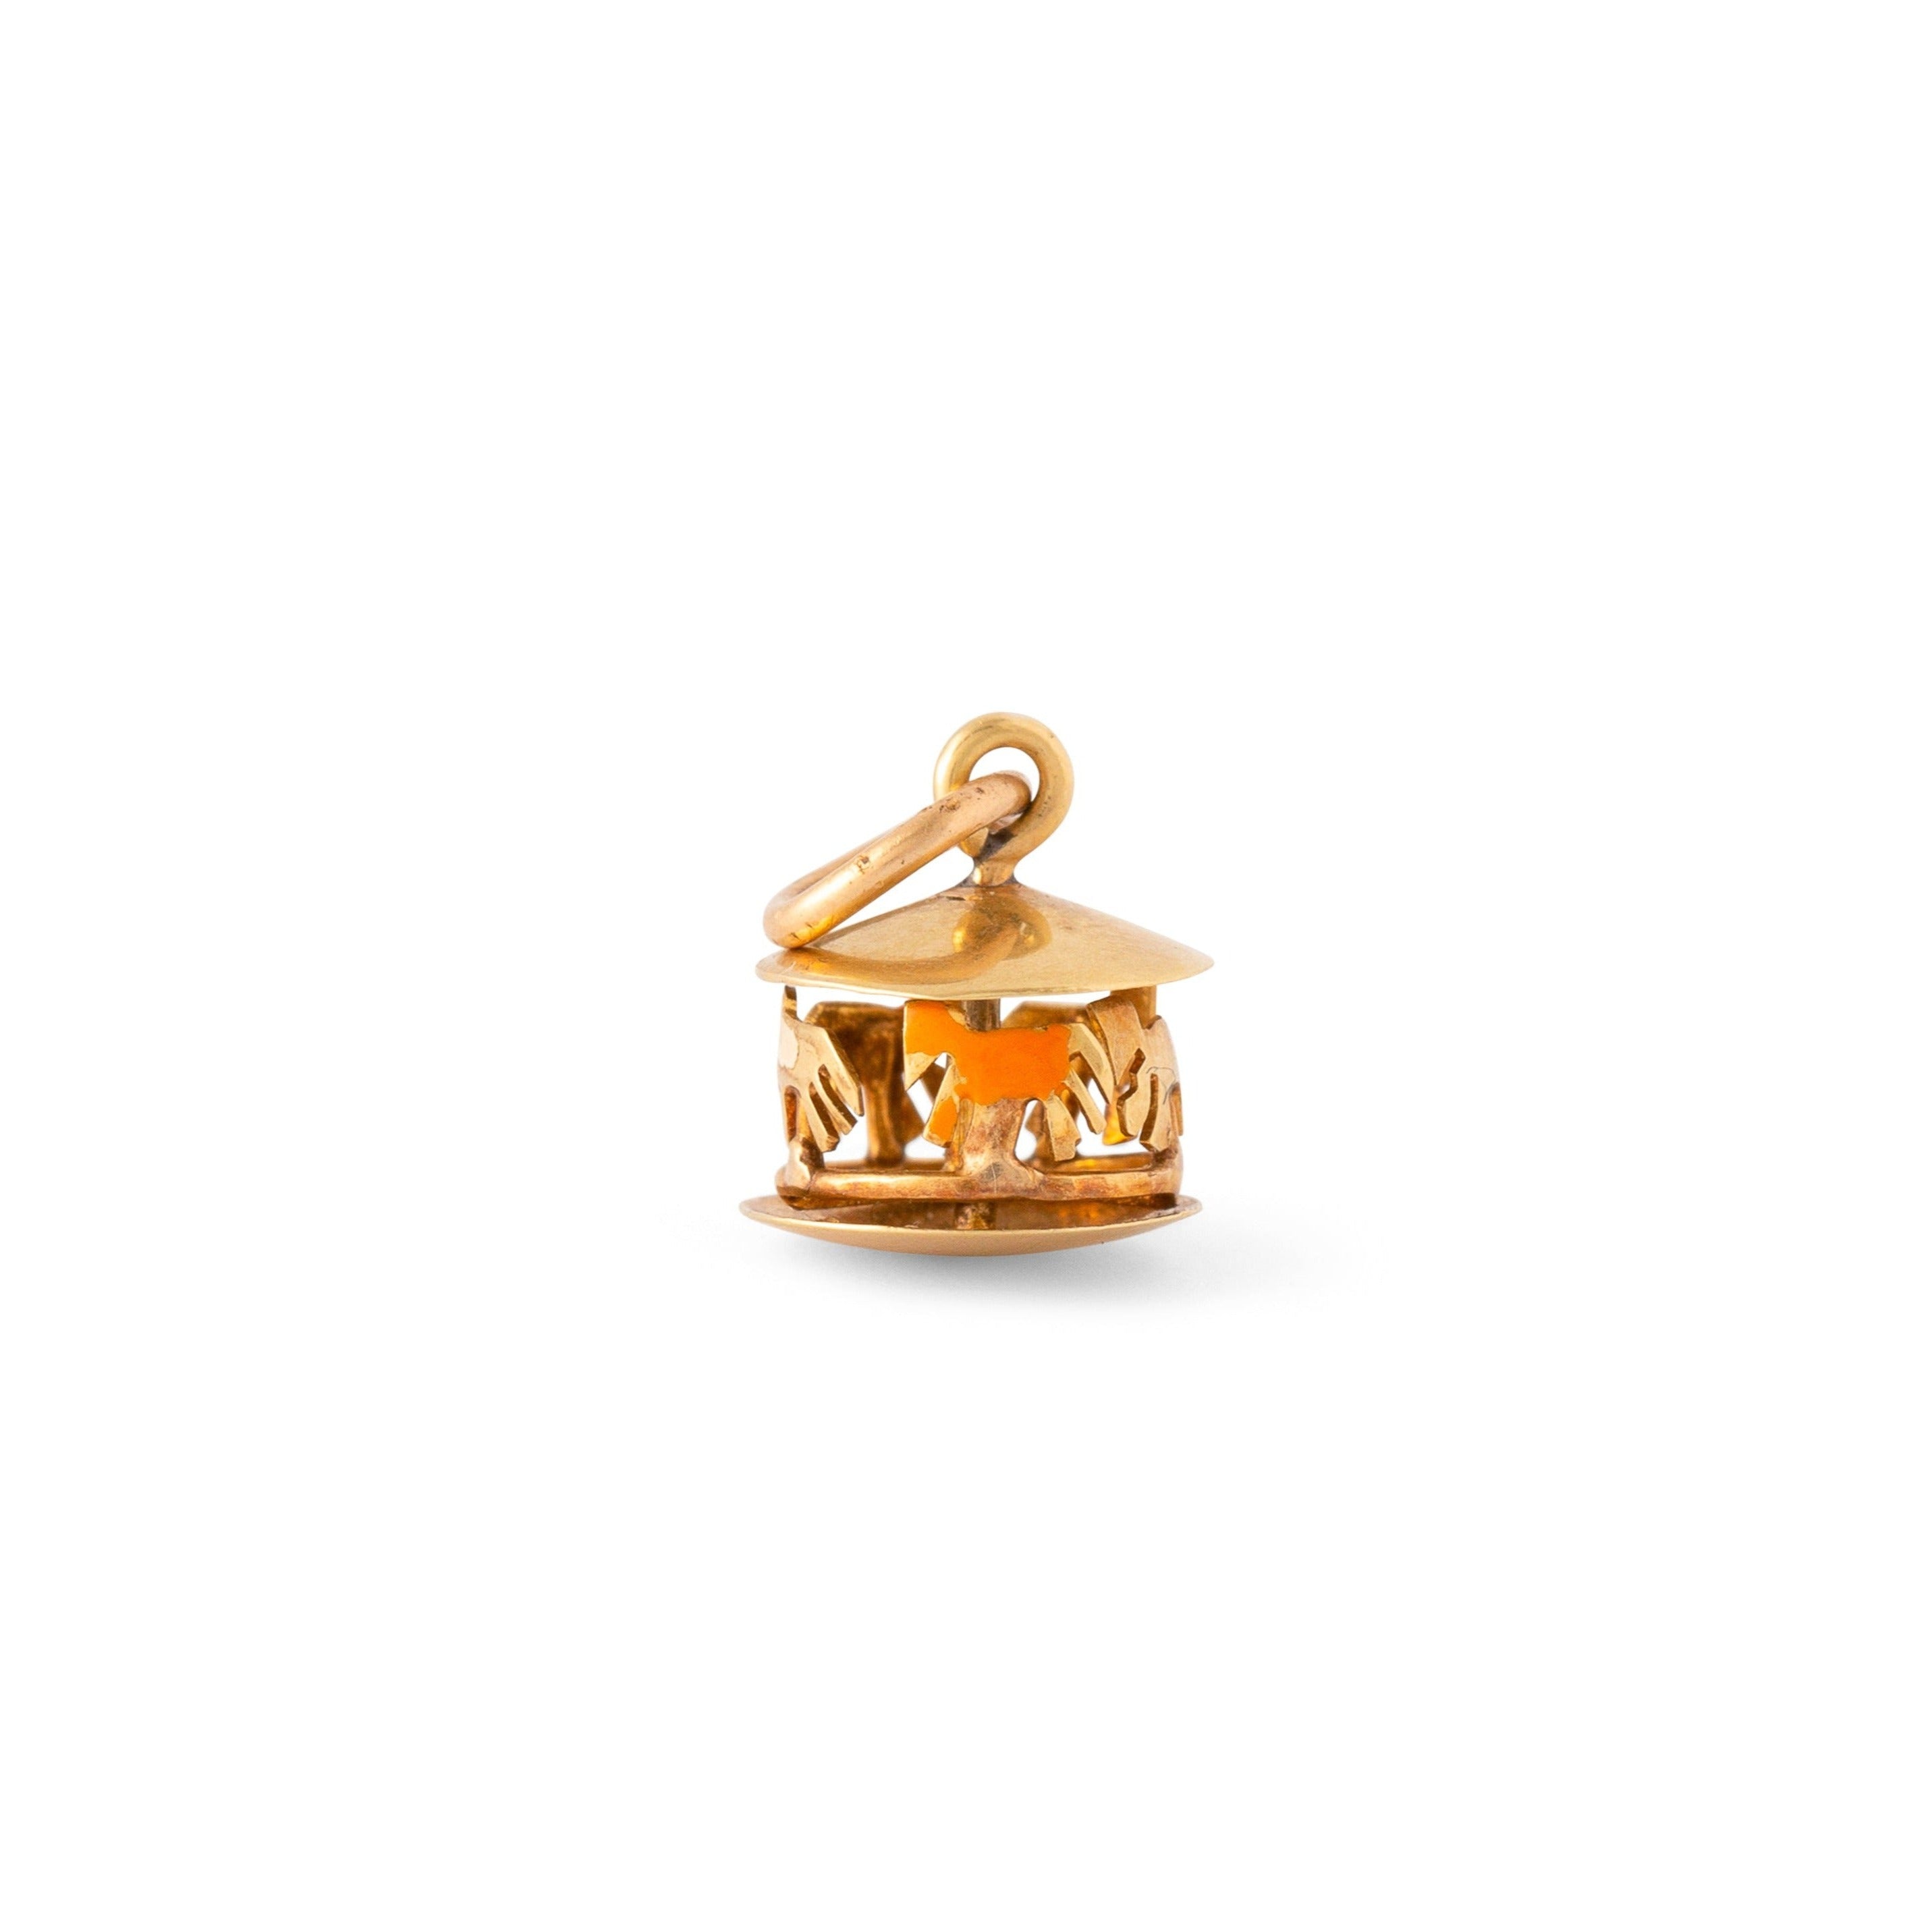 Movable Carousel 14K Gold and Enamel Charm